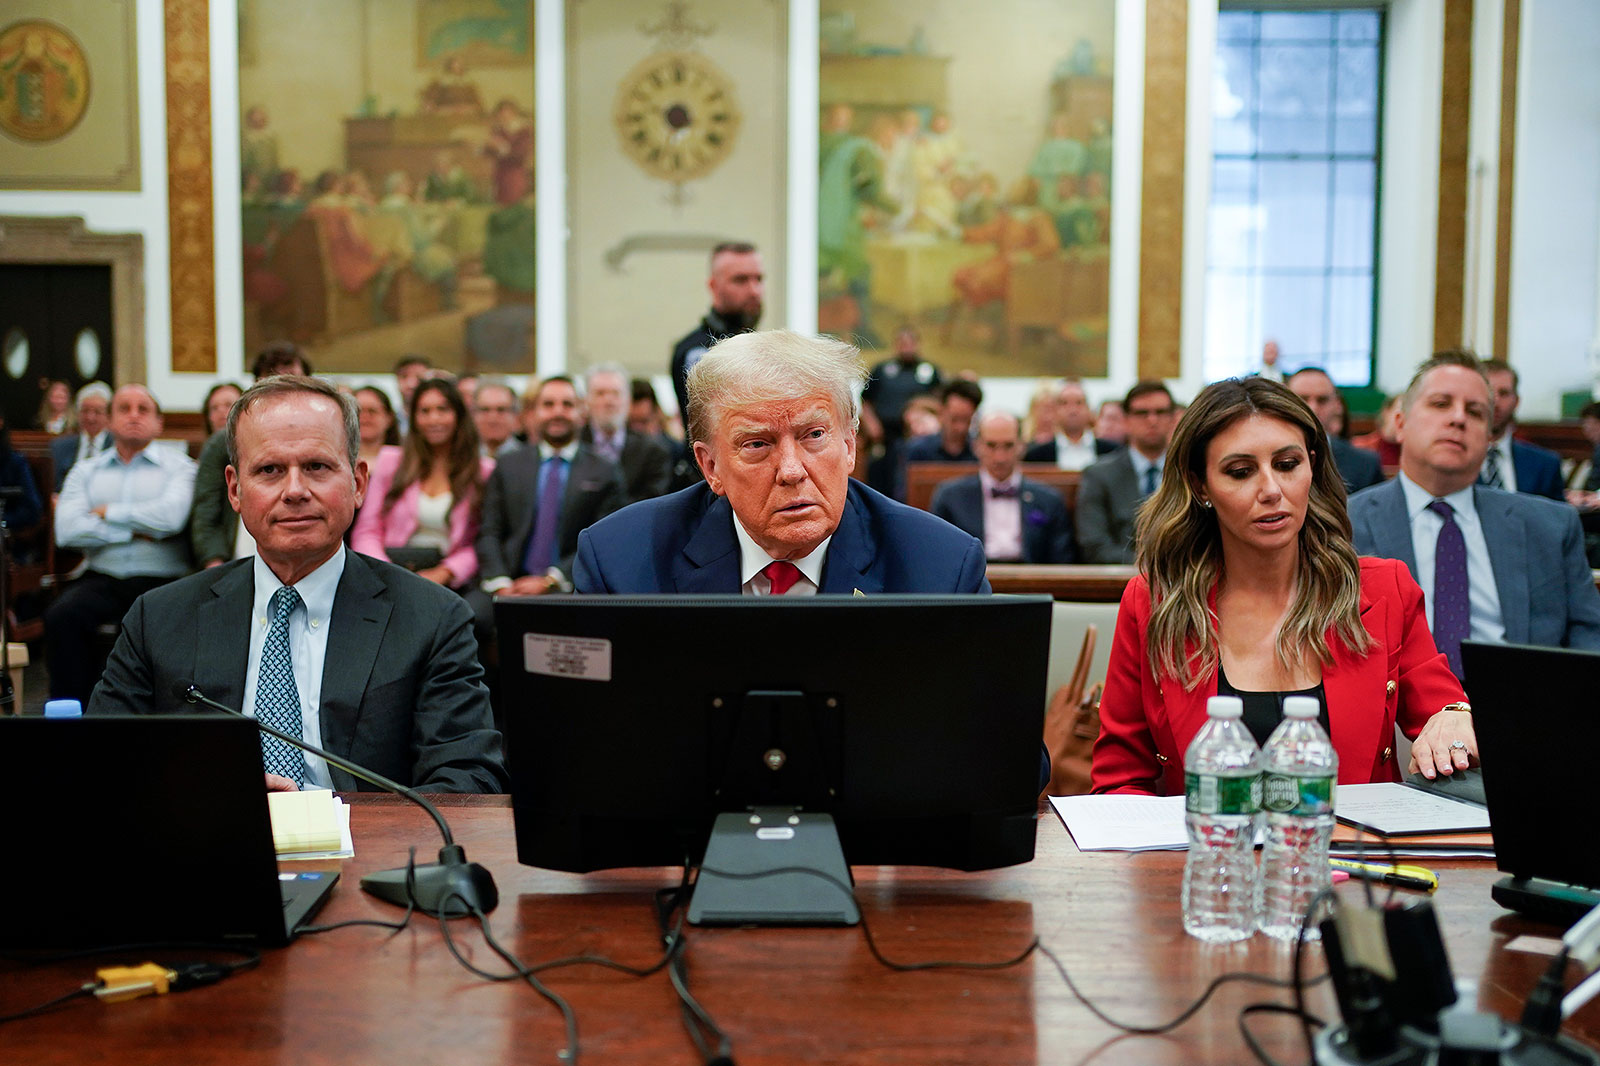 Former President Donald Trump is flanked by members of his legal team on the second day of a civil fraud trial in New York on Tuesday, October 3.